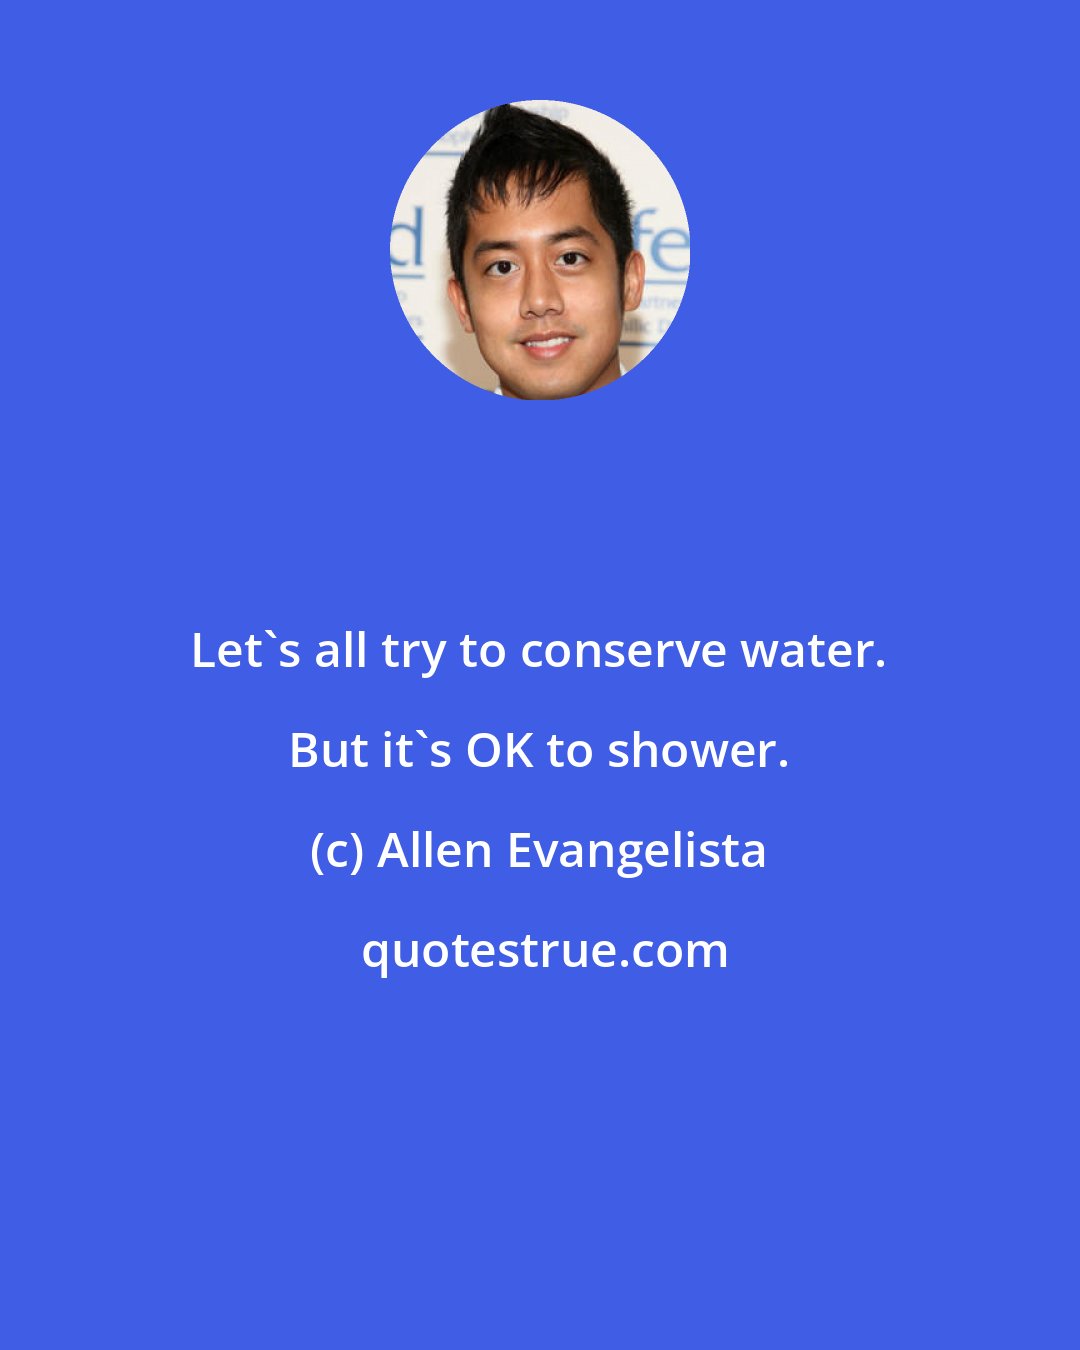 Allen Evangelista: Let's all try to conserve water. But it's OK to shower.